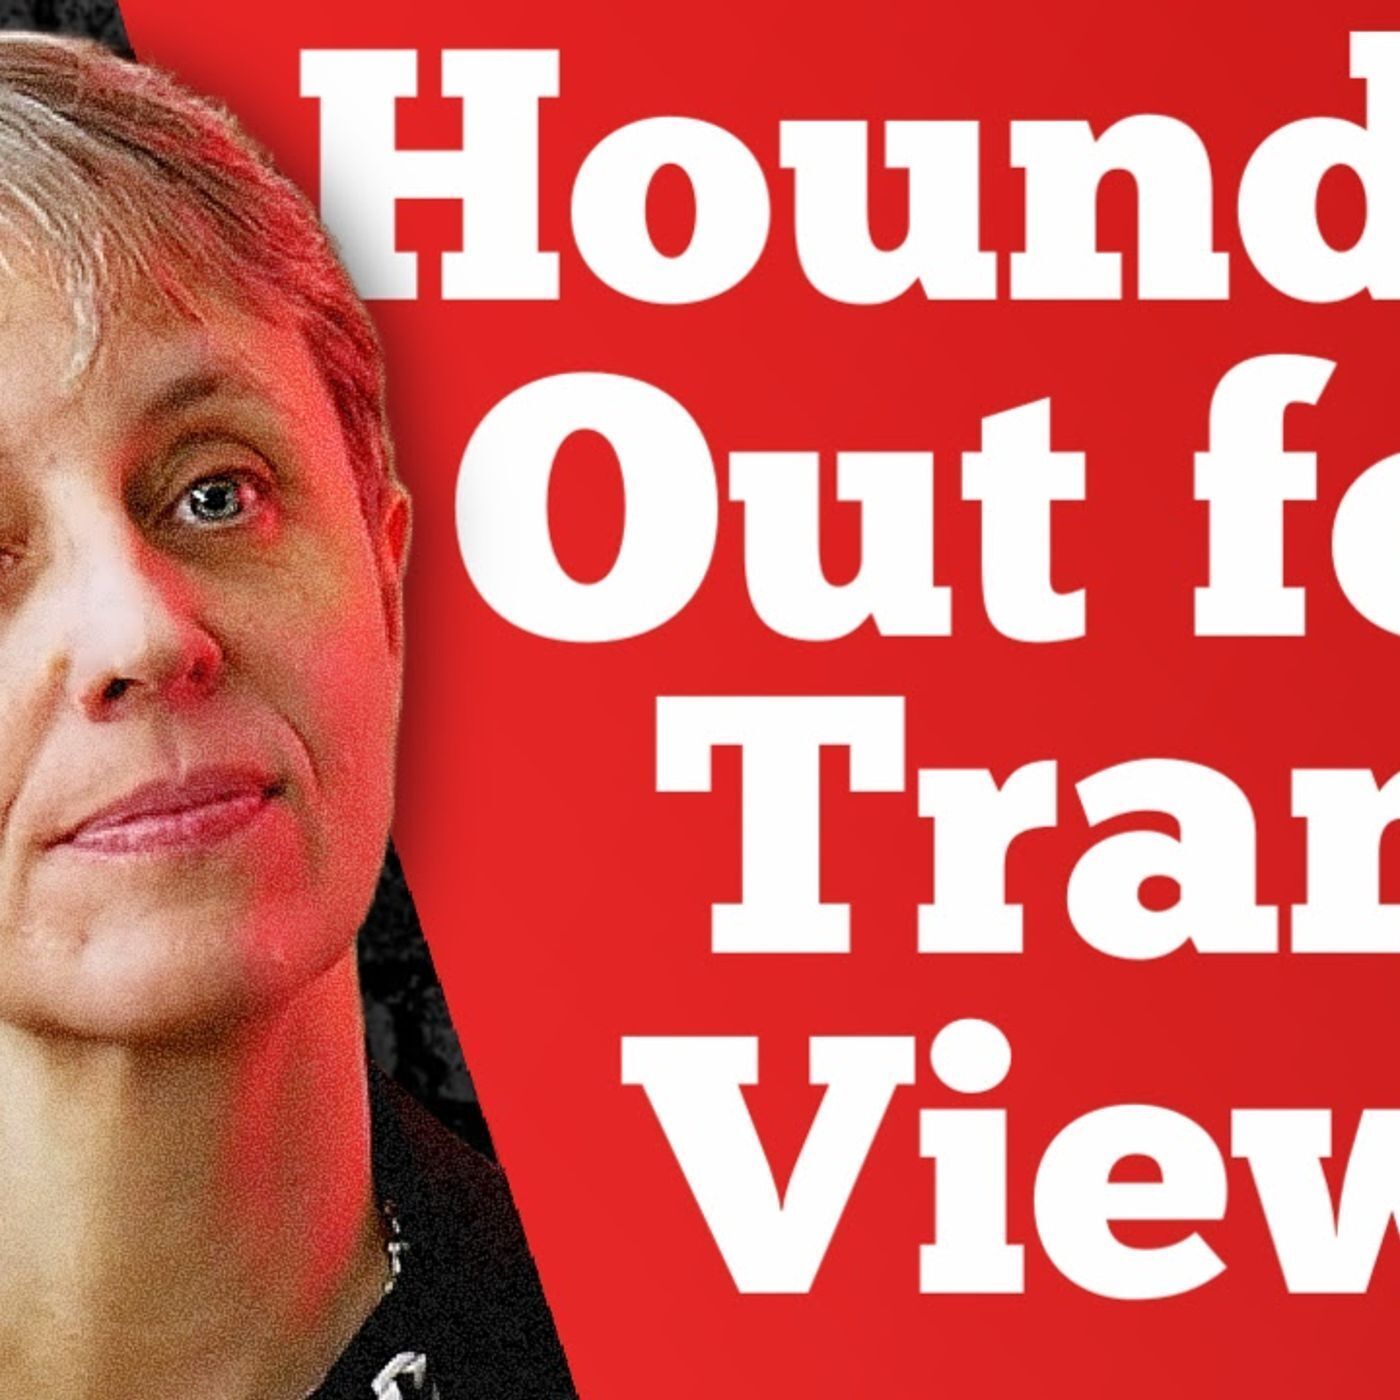 Kathleen Stock - Hounded Out for Trans Views